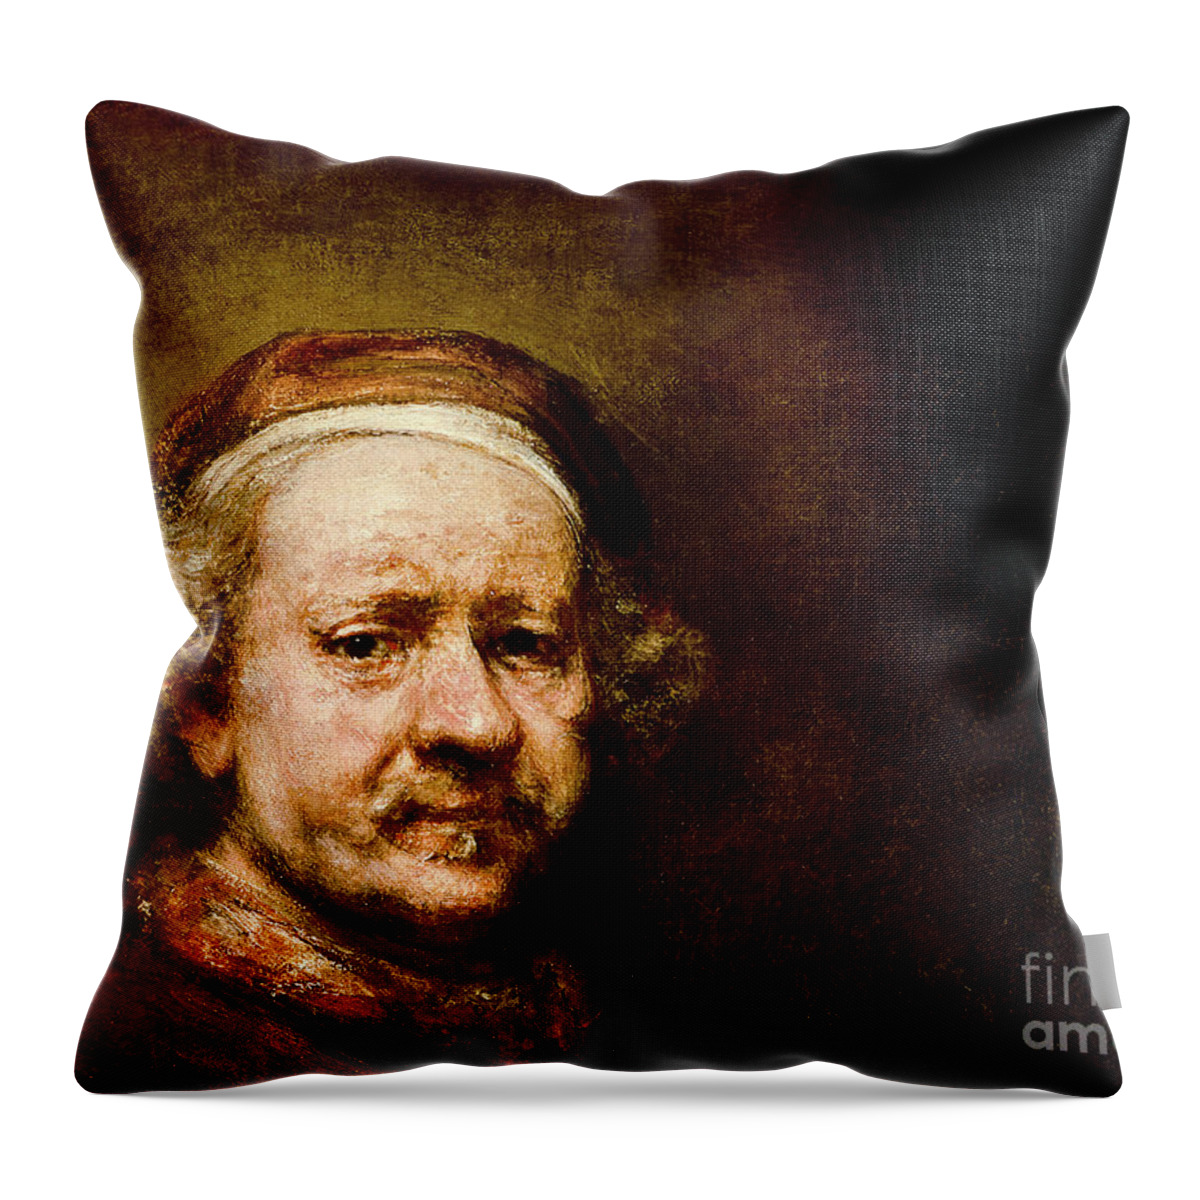 Rembrandt Throw Pillow featuring the painting Self Portrait In At The Age Of 63, 1669, Detail by Rembrandt Harmensz Van Rijn